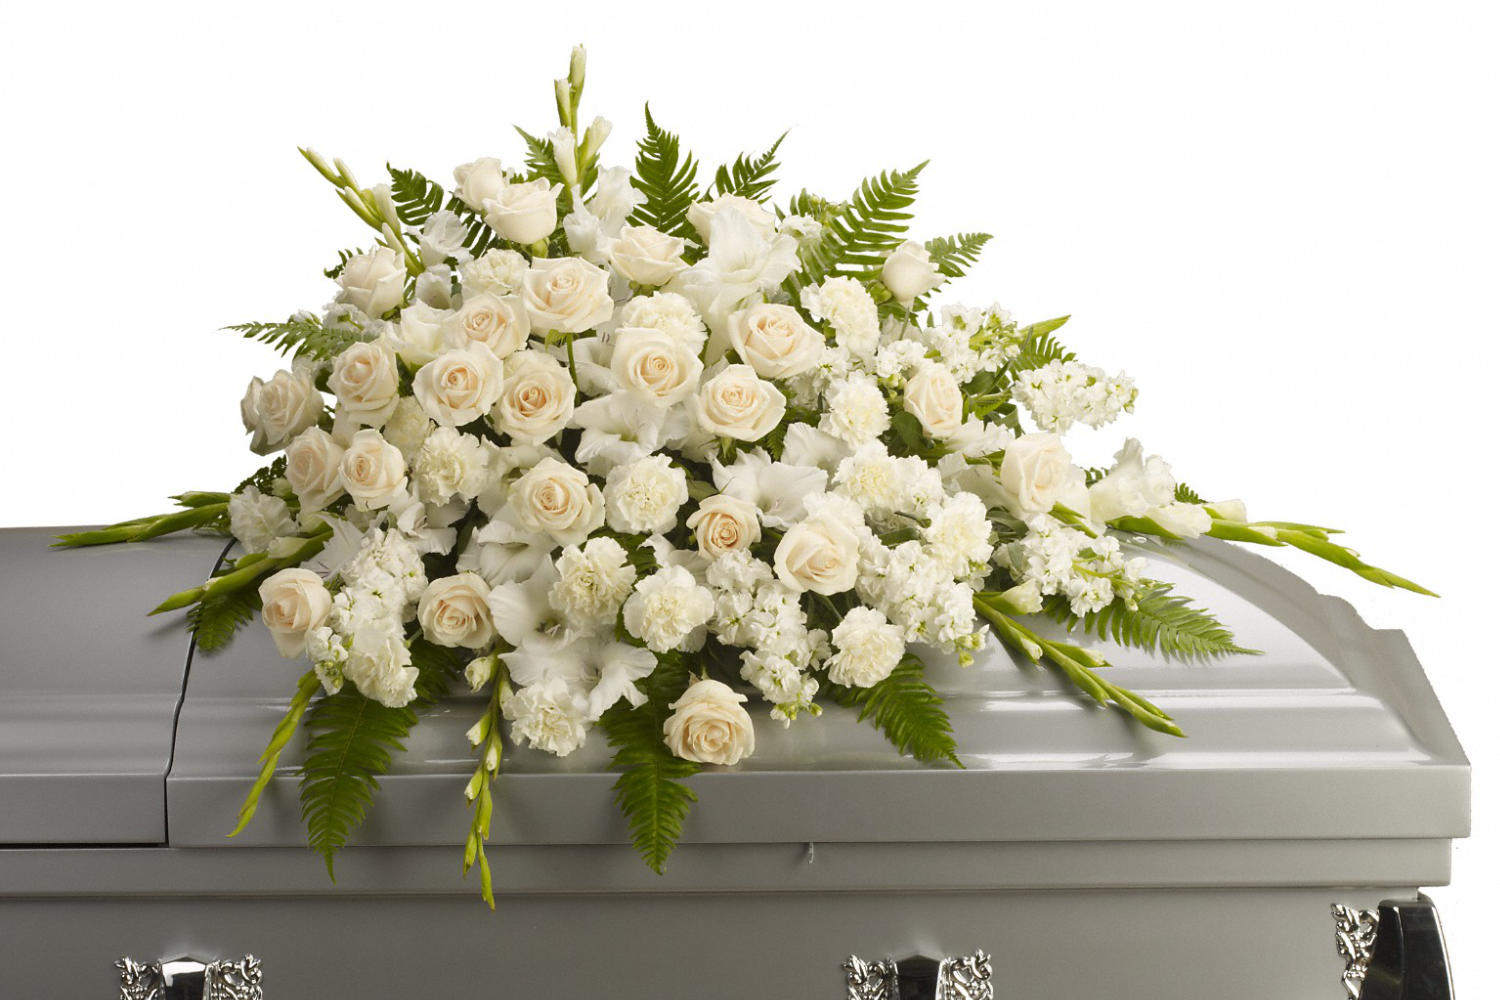 A beautiful half casket spray with Crème roses, white gladioli, stock and carnations are lovingly arranged with graceful ferns and more in this understated yet stunning arrangement.